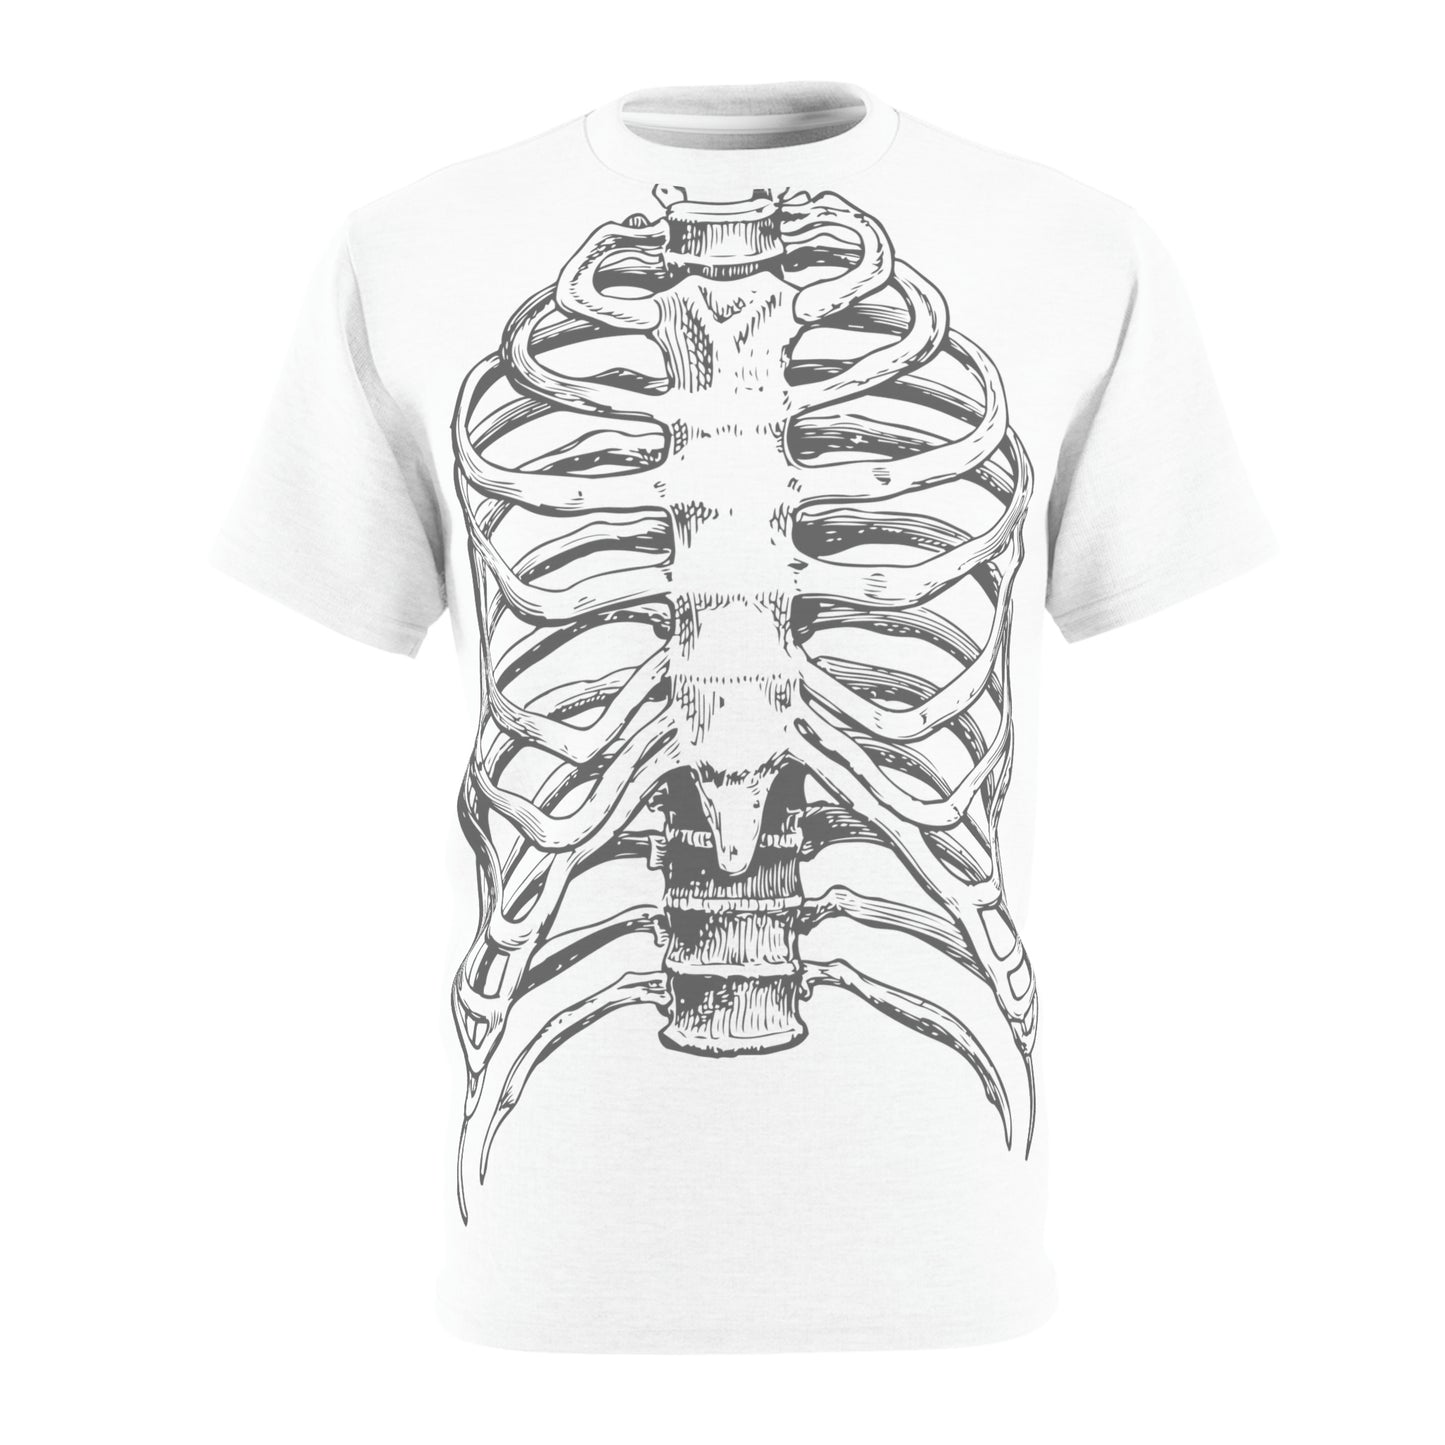 "Harder to Live" Ribcage Tee